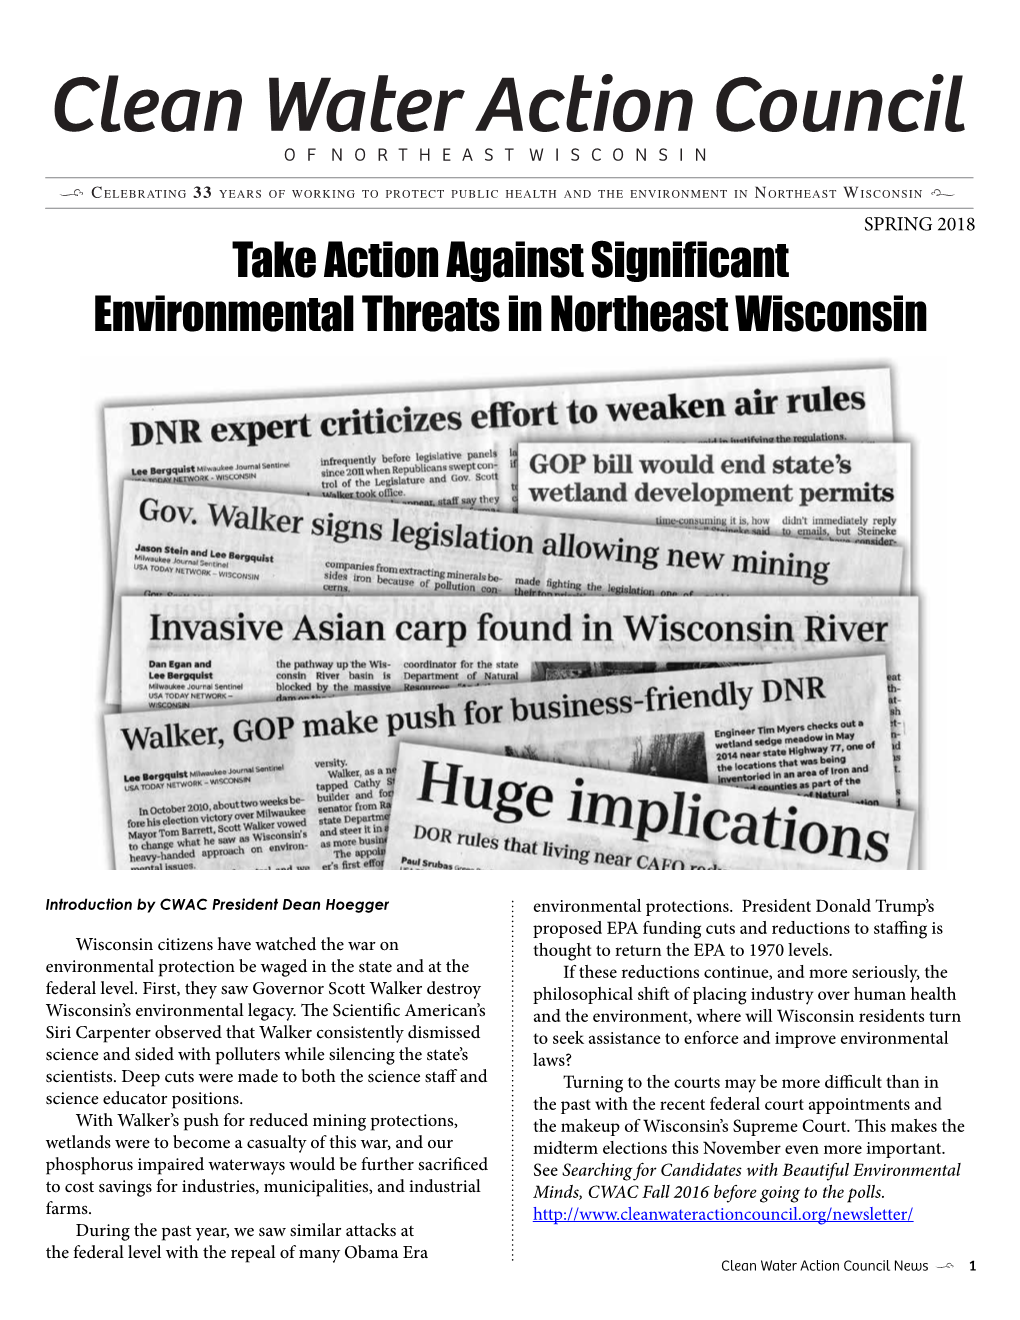 Take Action Against Significant Environmental Threats in Northeast Wisconsin